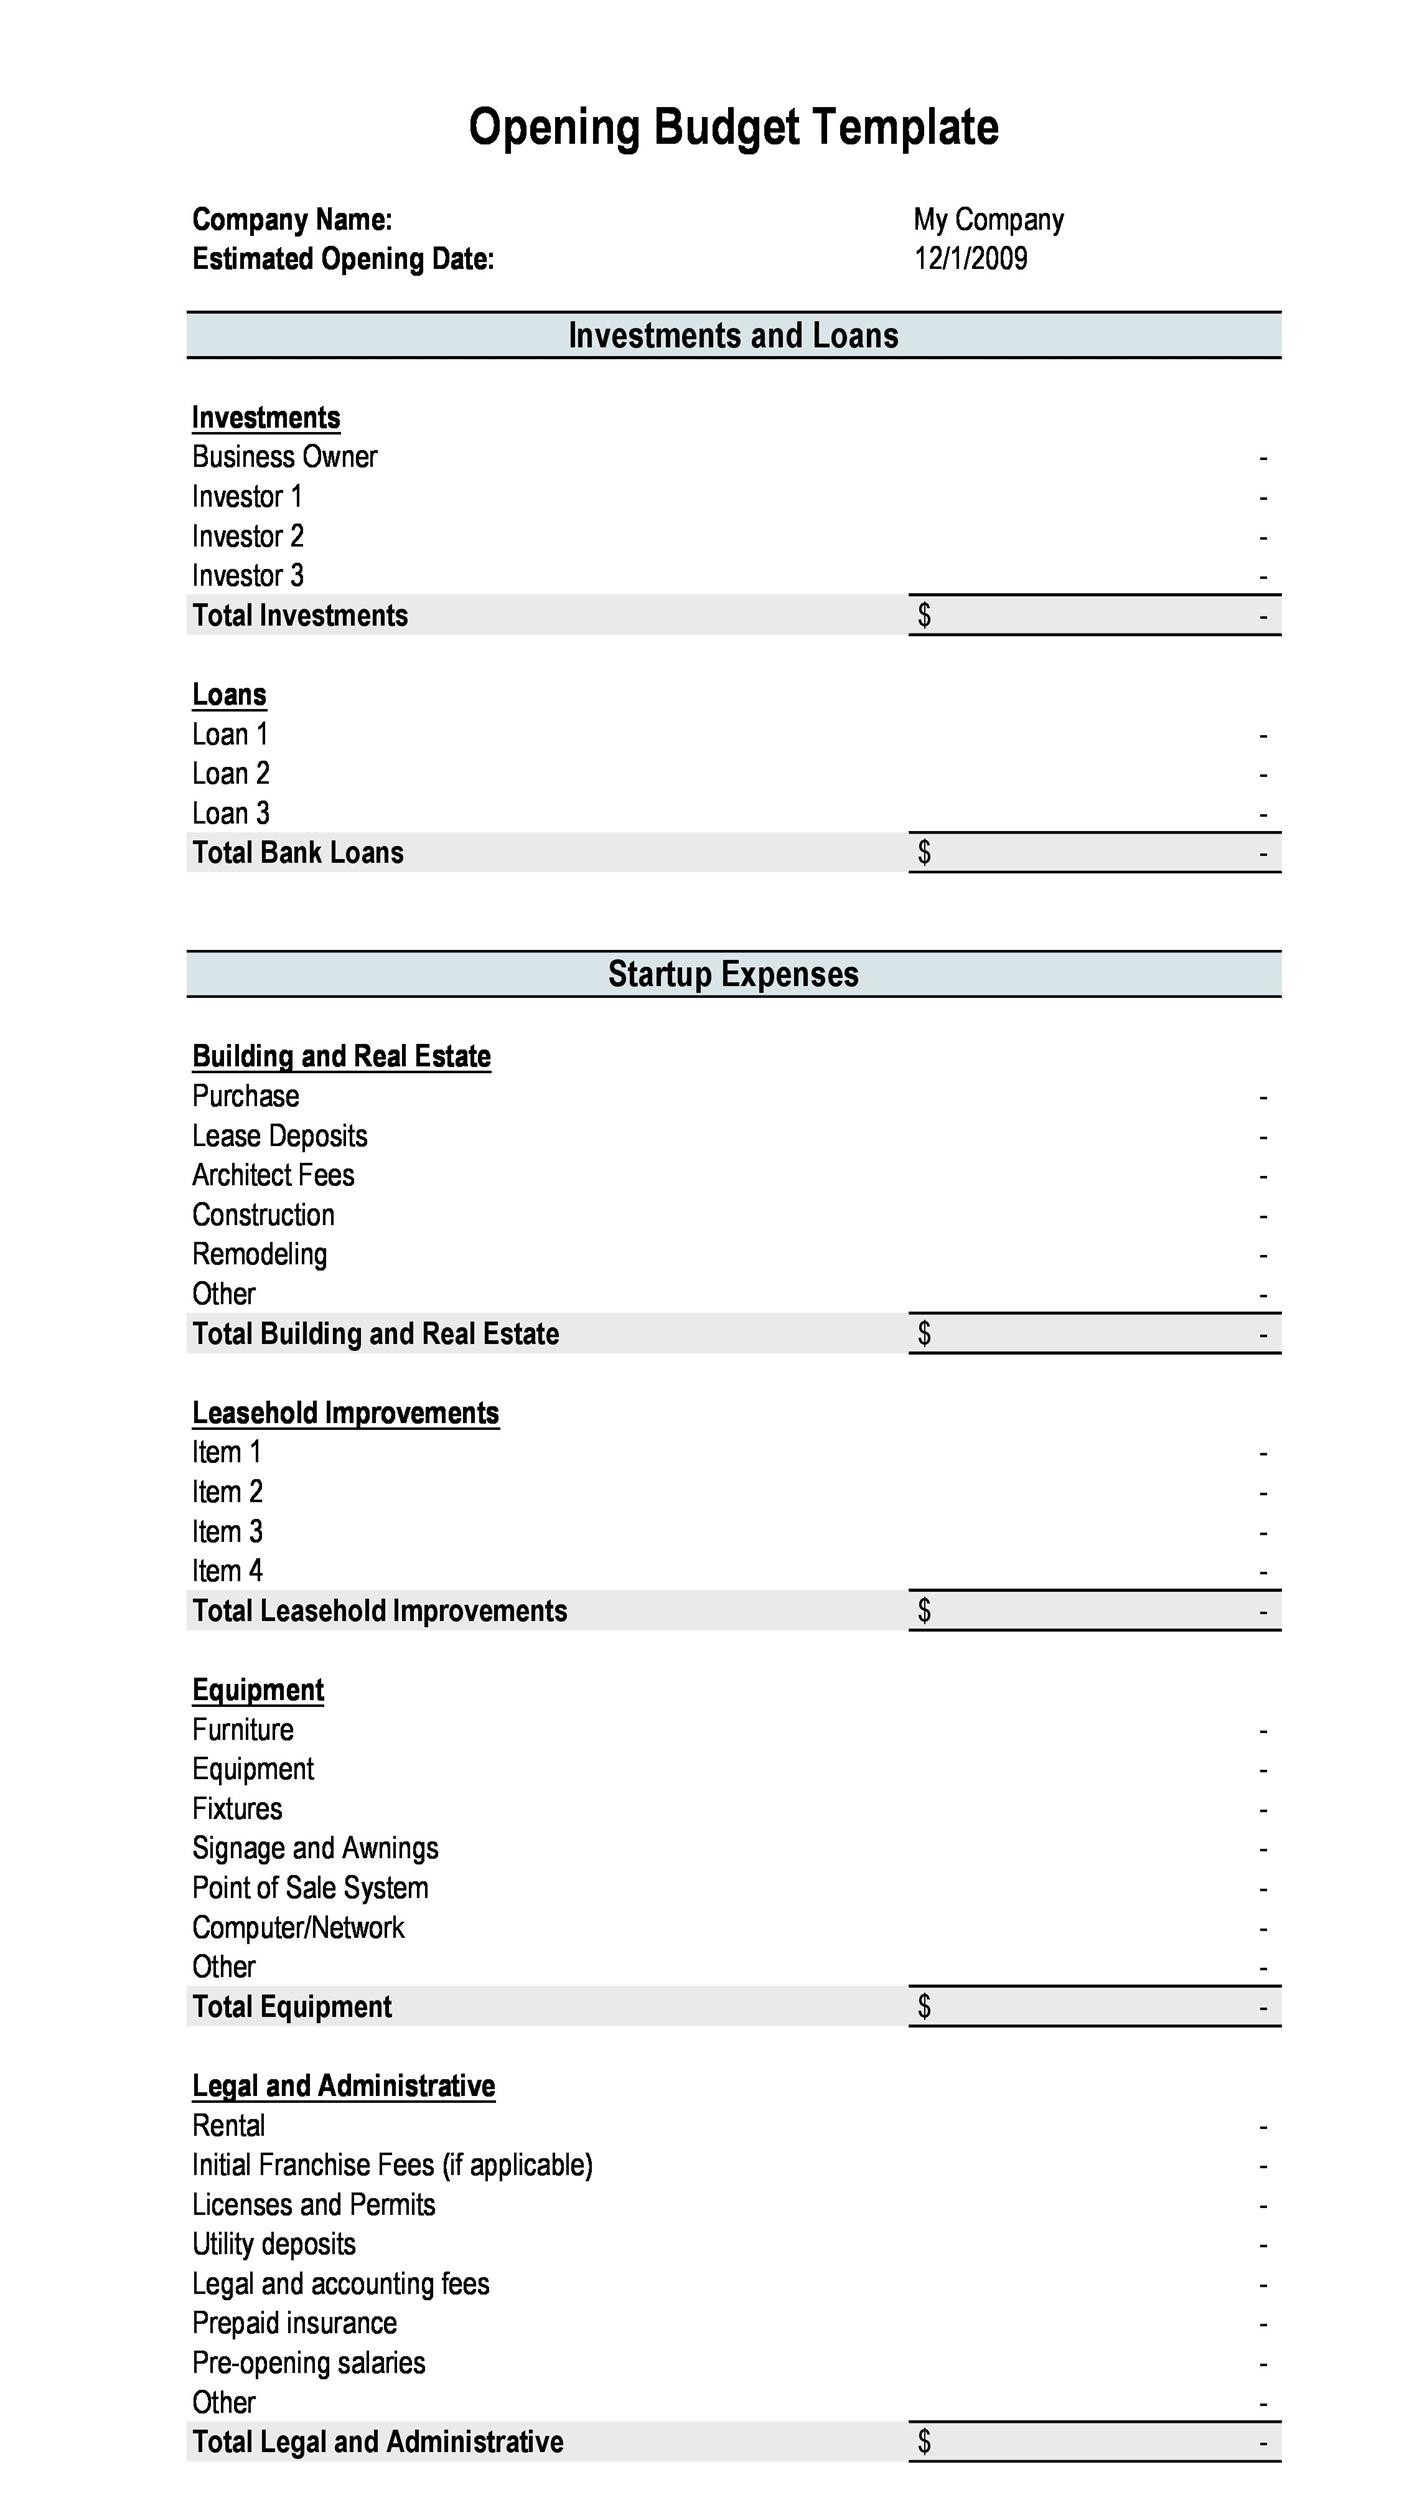 Business Expenses Template Free Download from templatelab.com